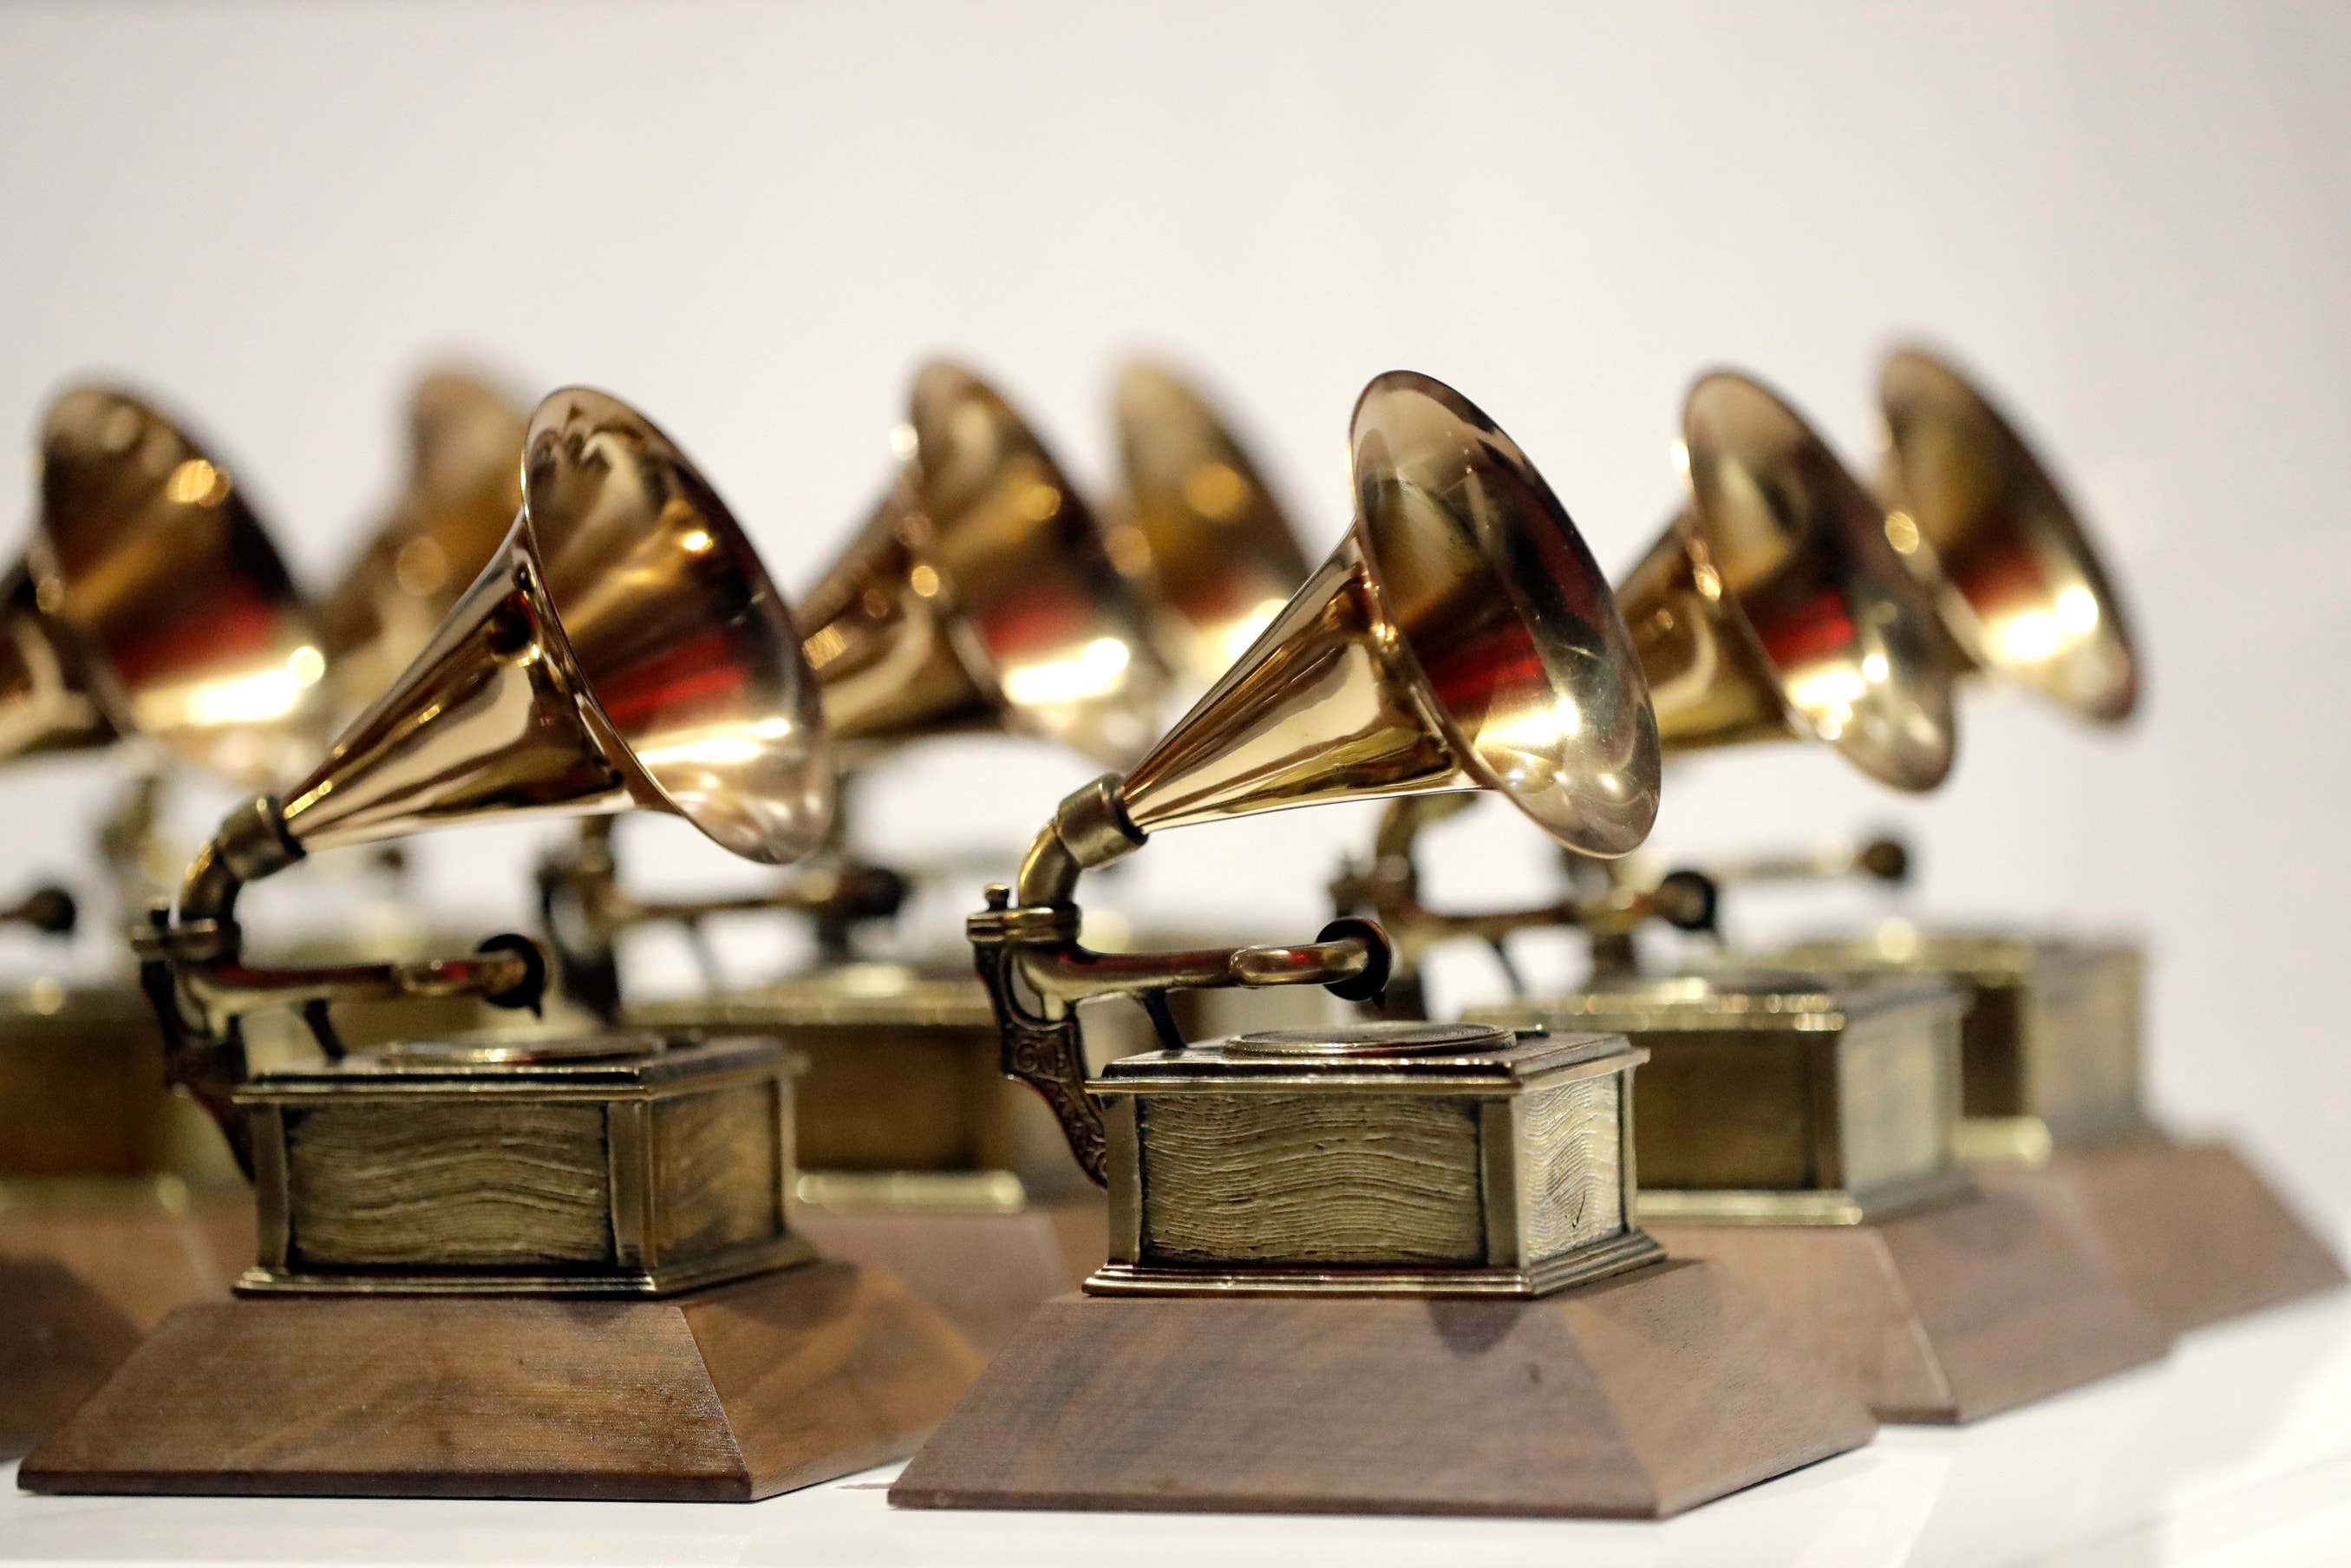 Grammy Awards pledge to hire more diverse candidates for 2022 show